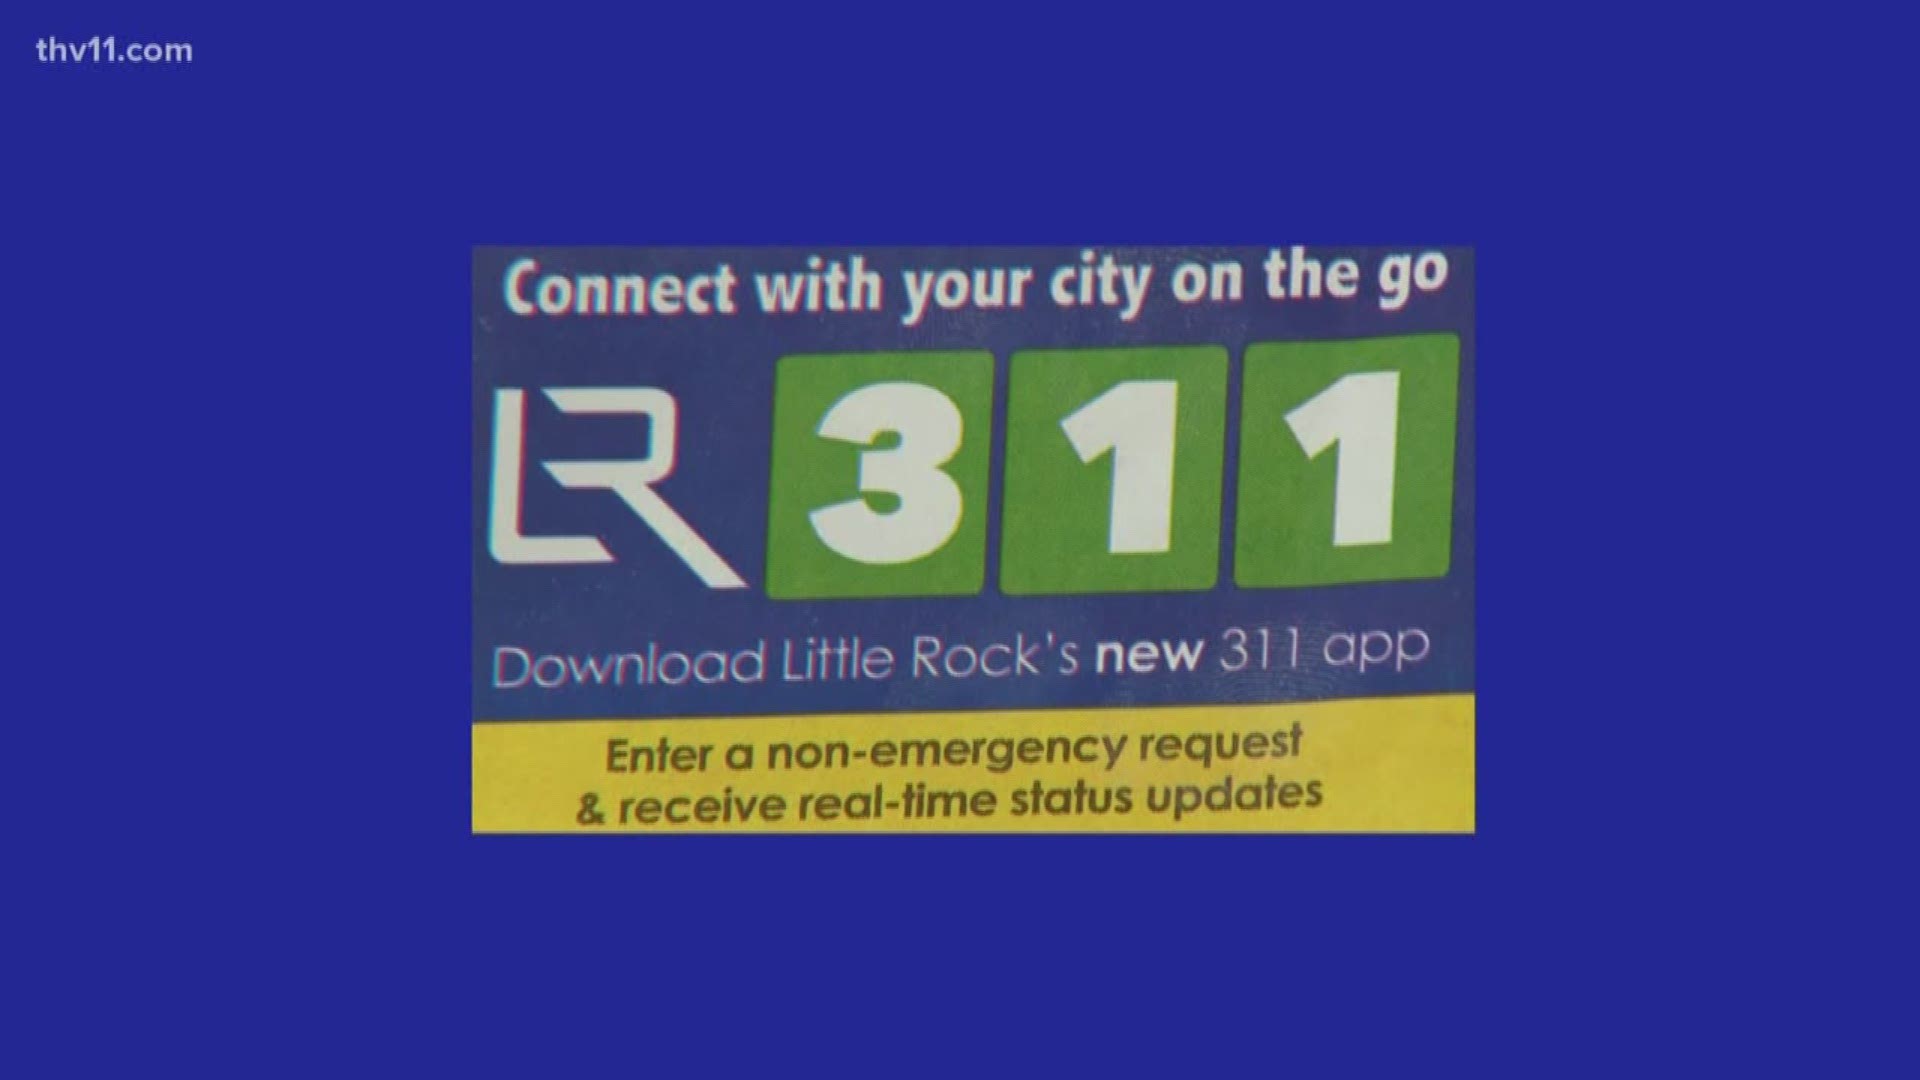 People concerned over 311 request response in Little Rock